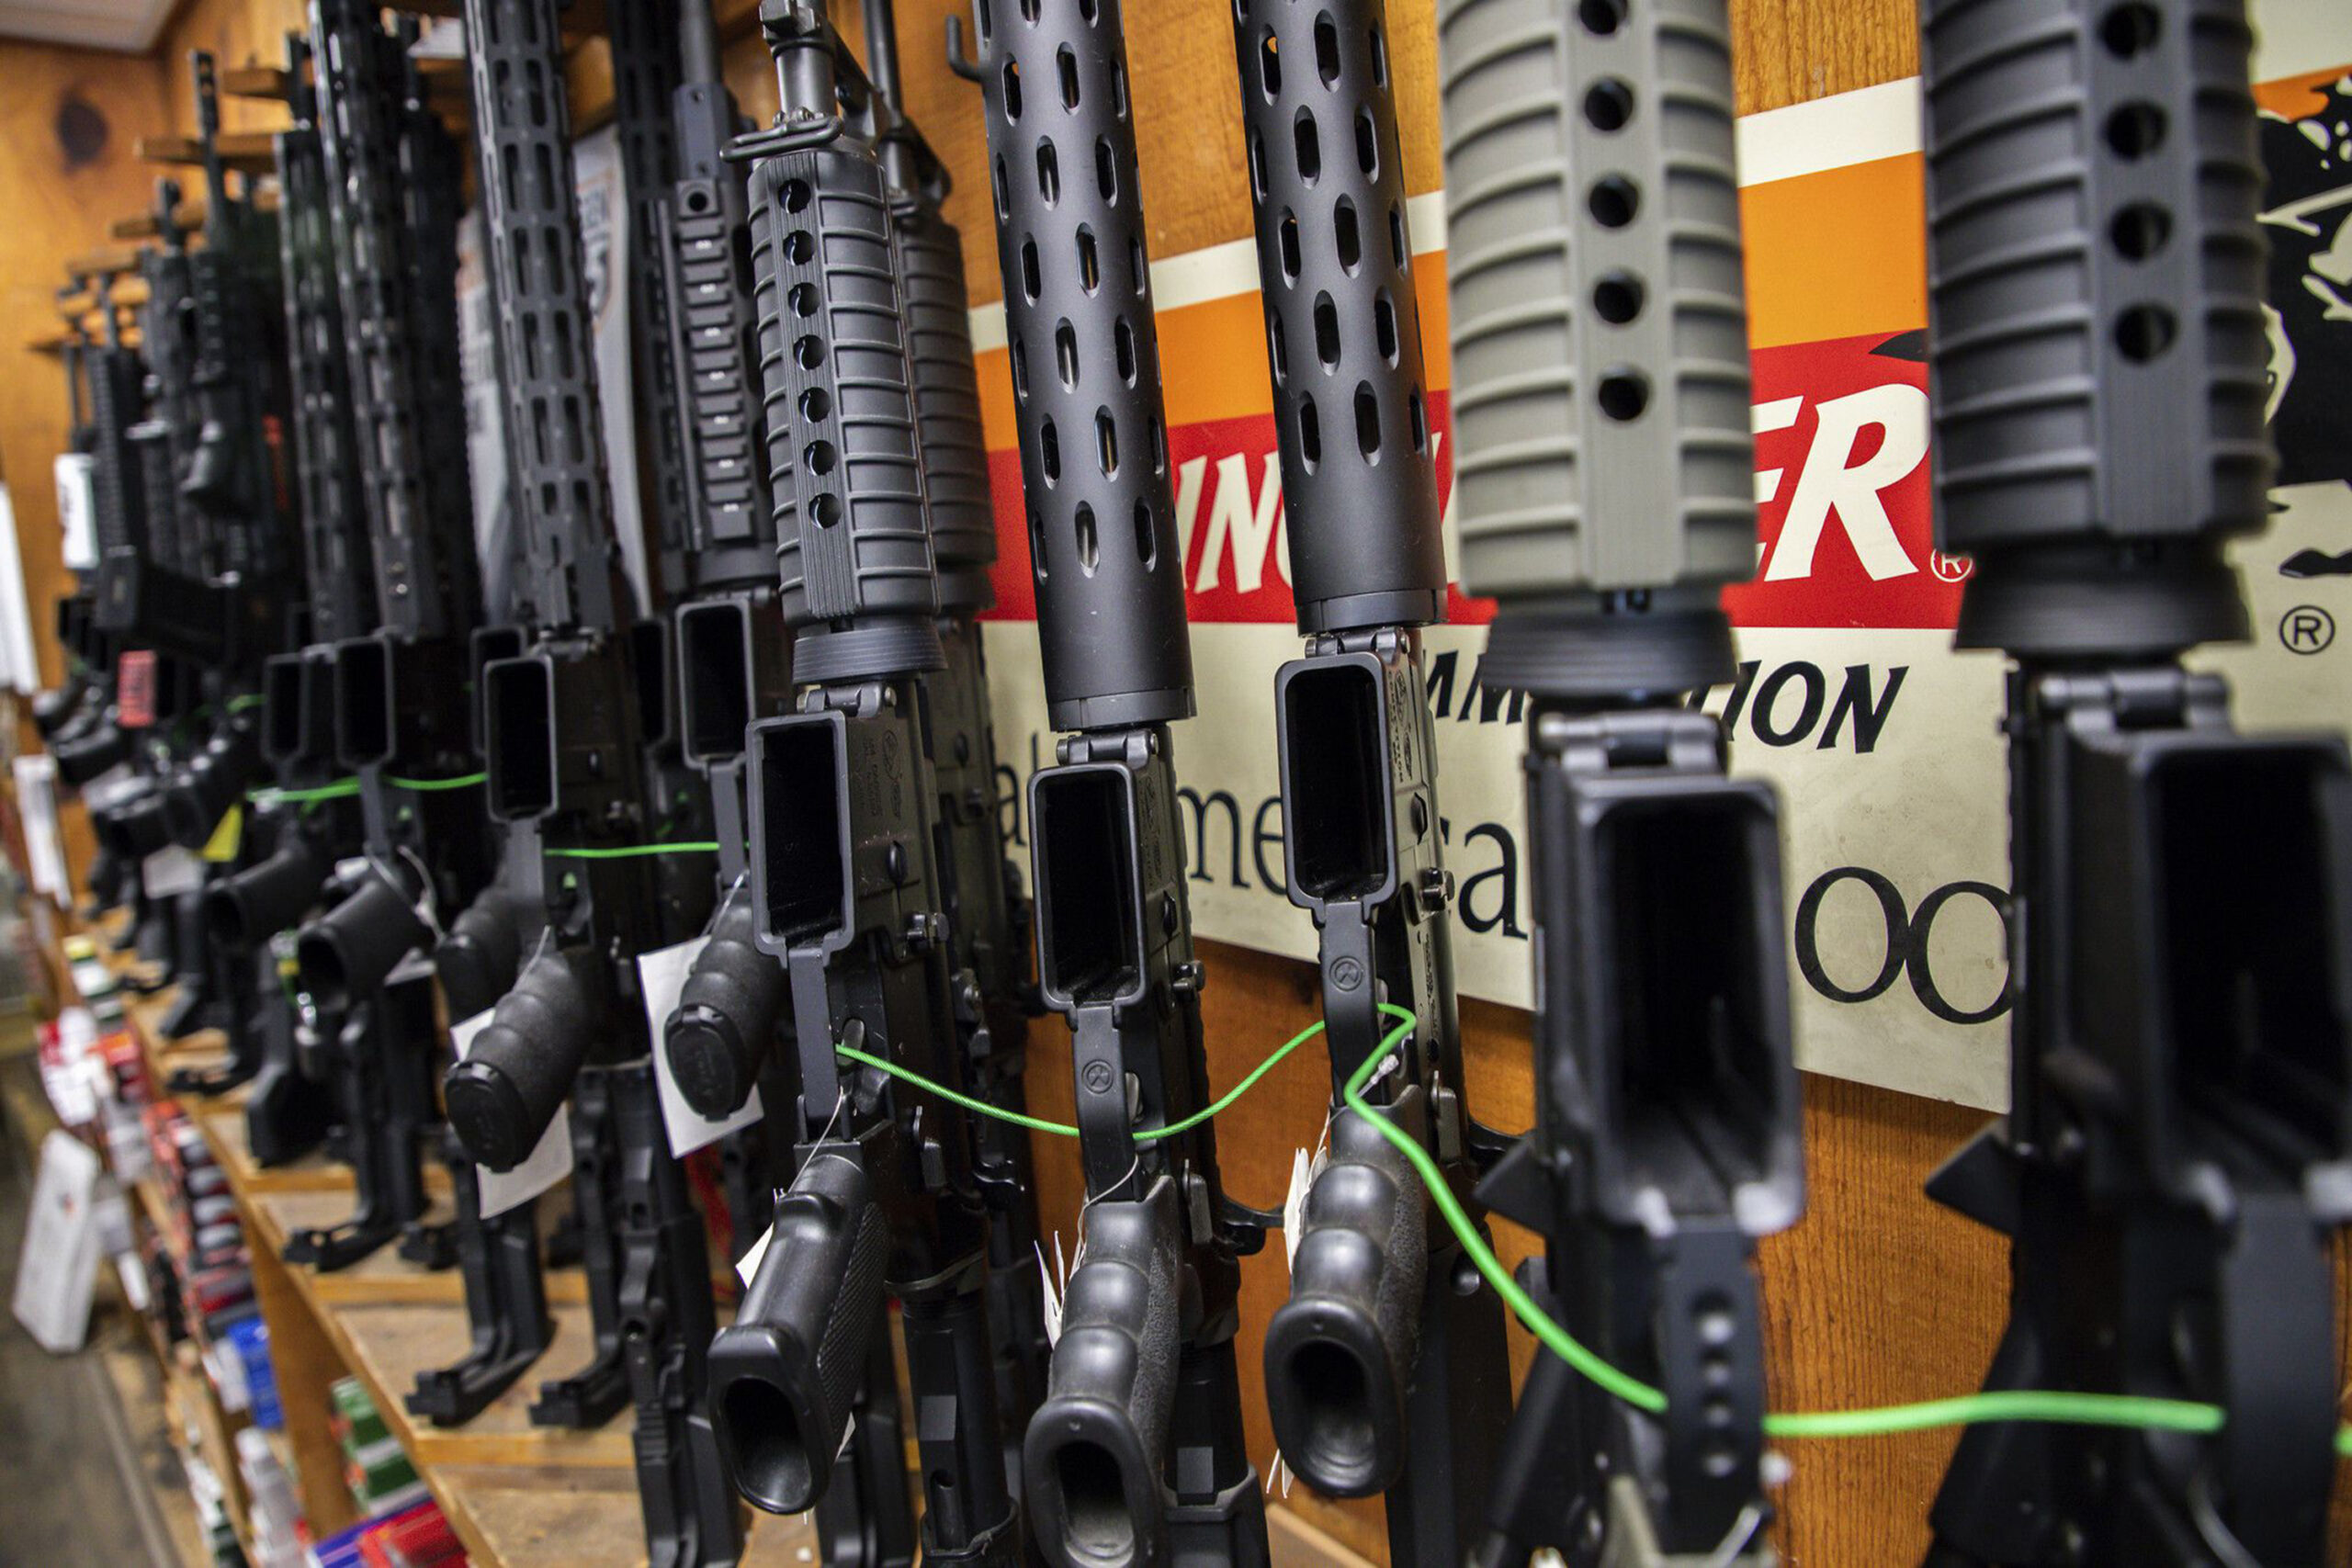 US Supreme Court rejects emergency appeal against Illinois gun control law.